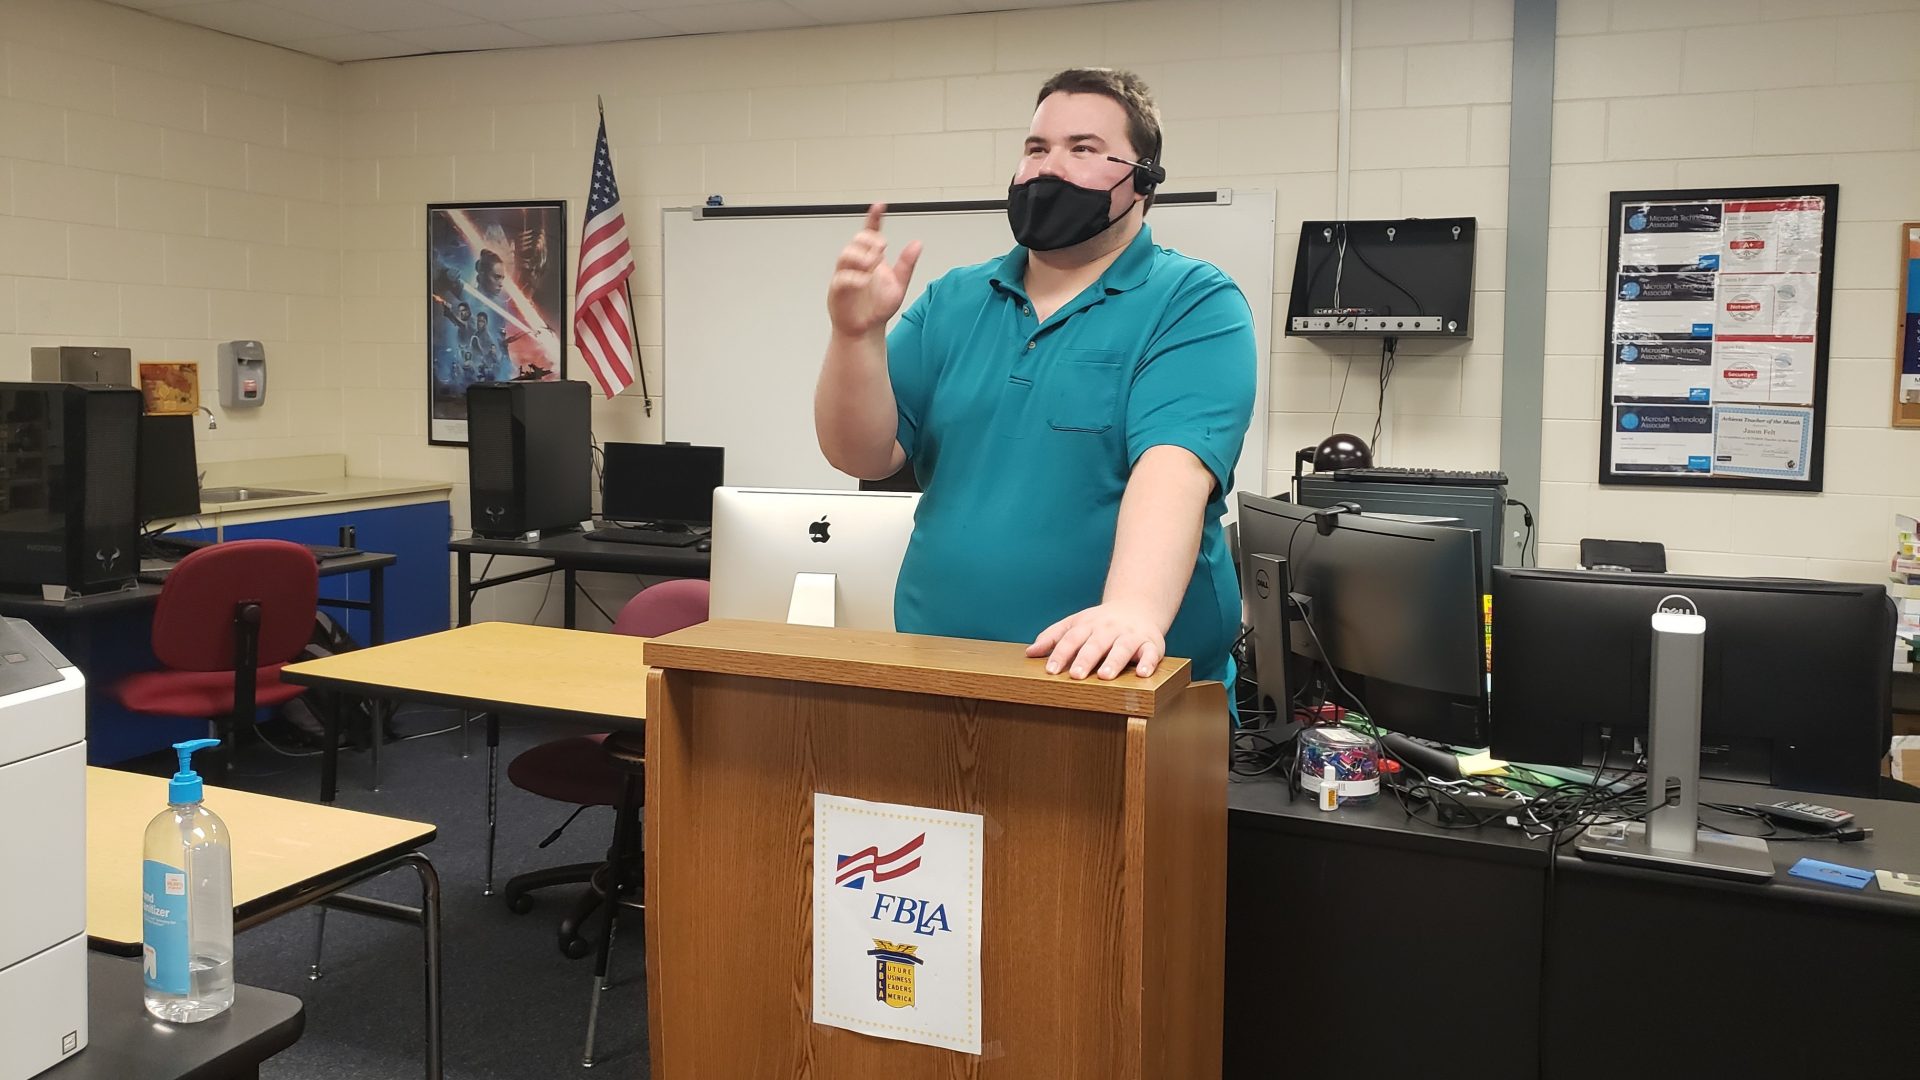 Jason Felt teaches a cybersecurity class at Countryside High School in Clearwater, Fla. The group Cyber Florida has helped organize the program in many parts of the state, and is planning to expand its "digital literacy" campaign to include topics like disinformation.